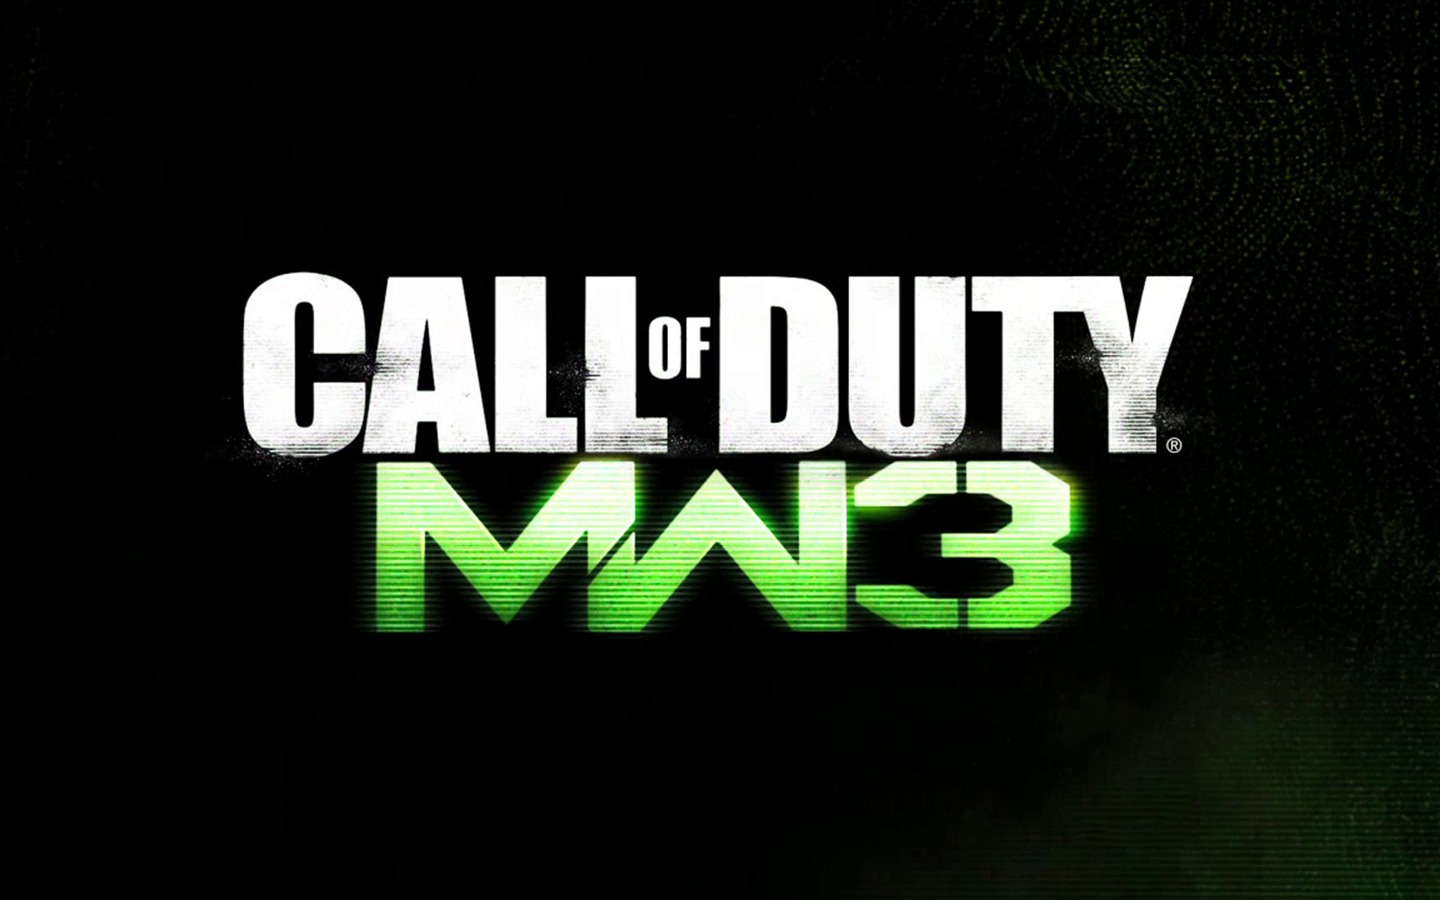 Call of Duty: MW3 wallpapers HD #9 - 1440x900